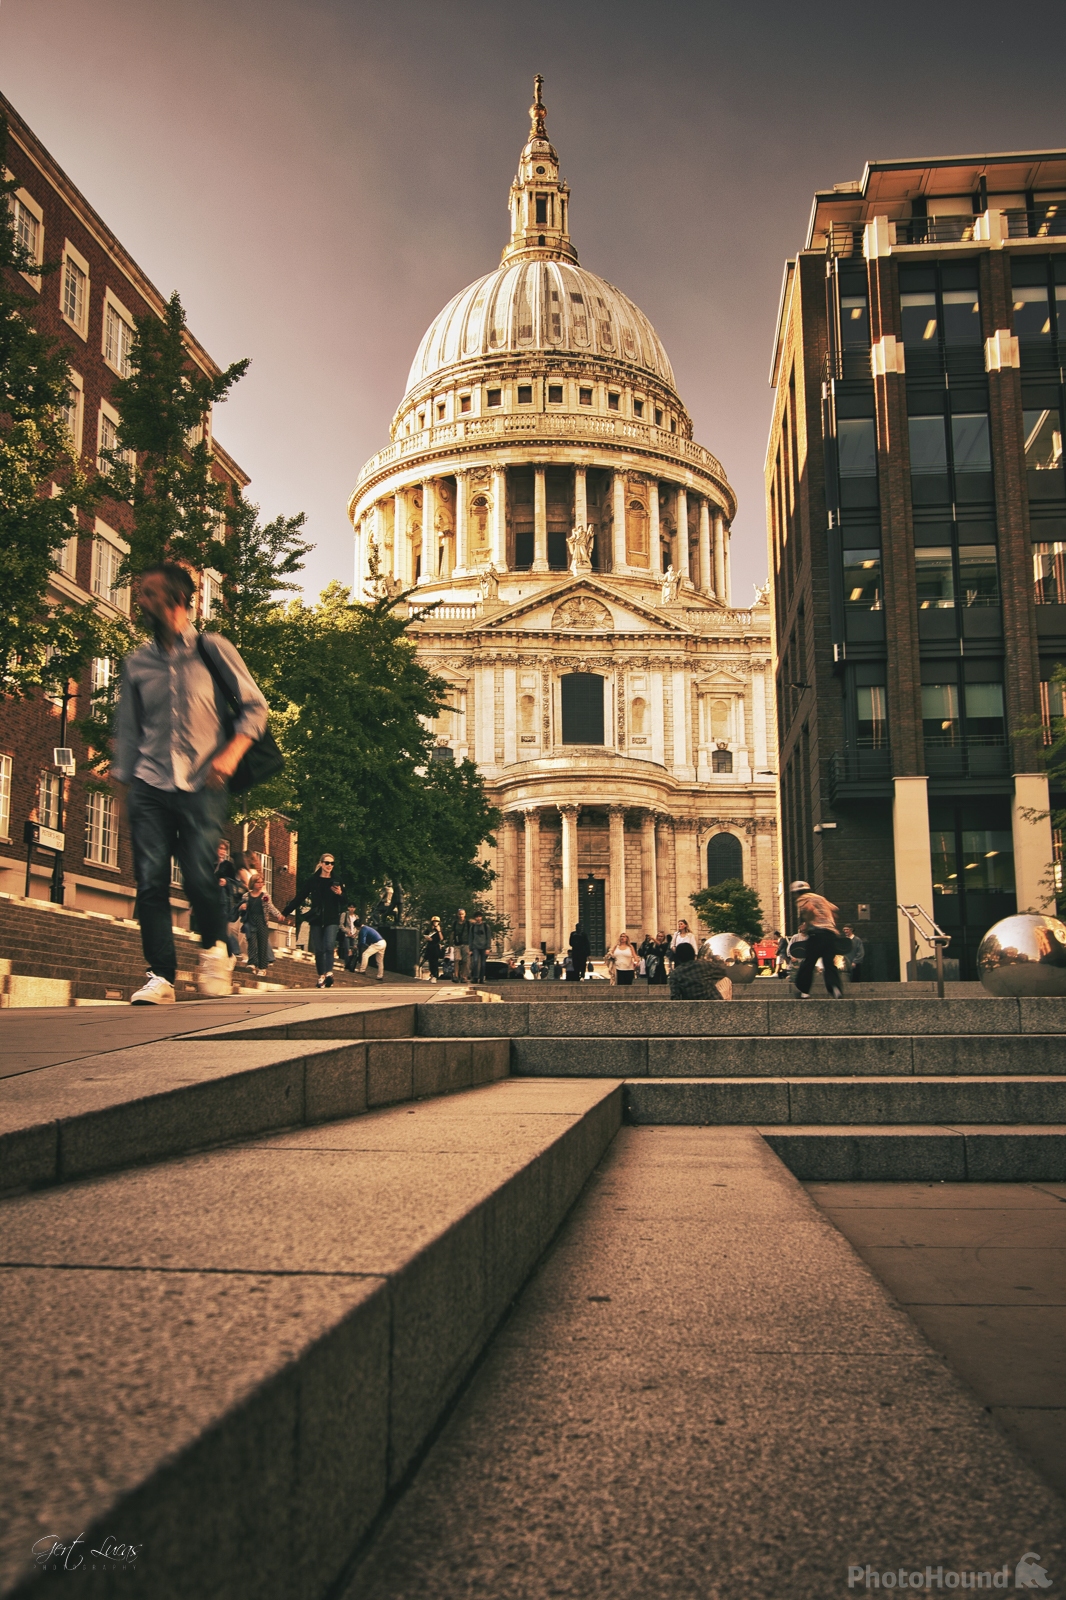 Image of Carter Lane Gardens - St Pauls Cathedral Viewpoint by Gert Lucas